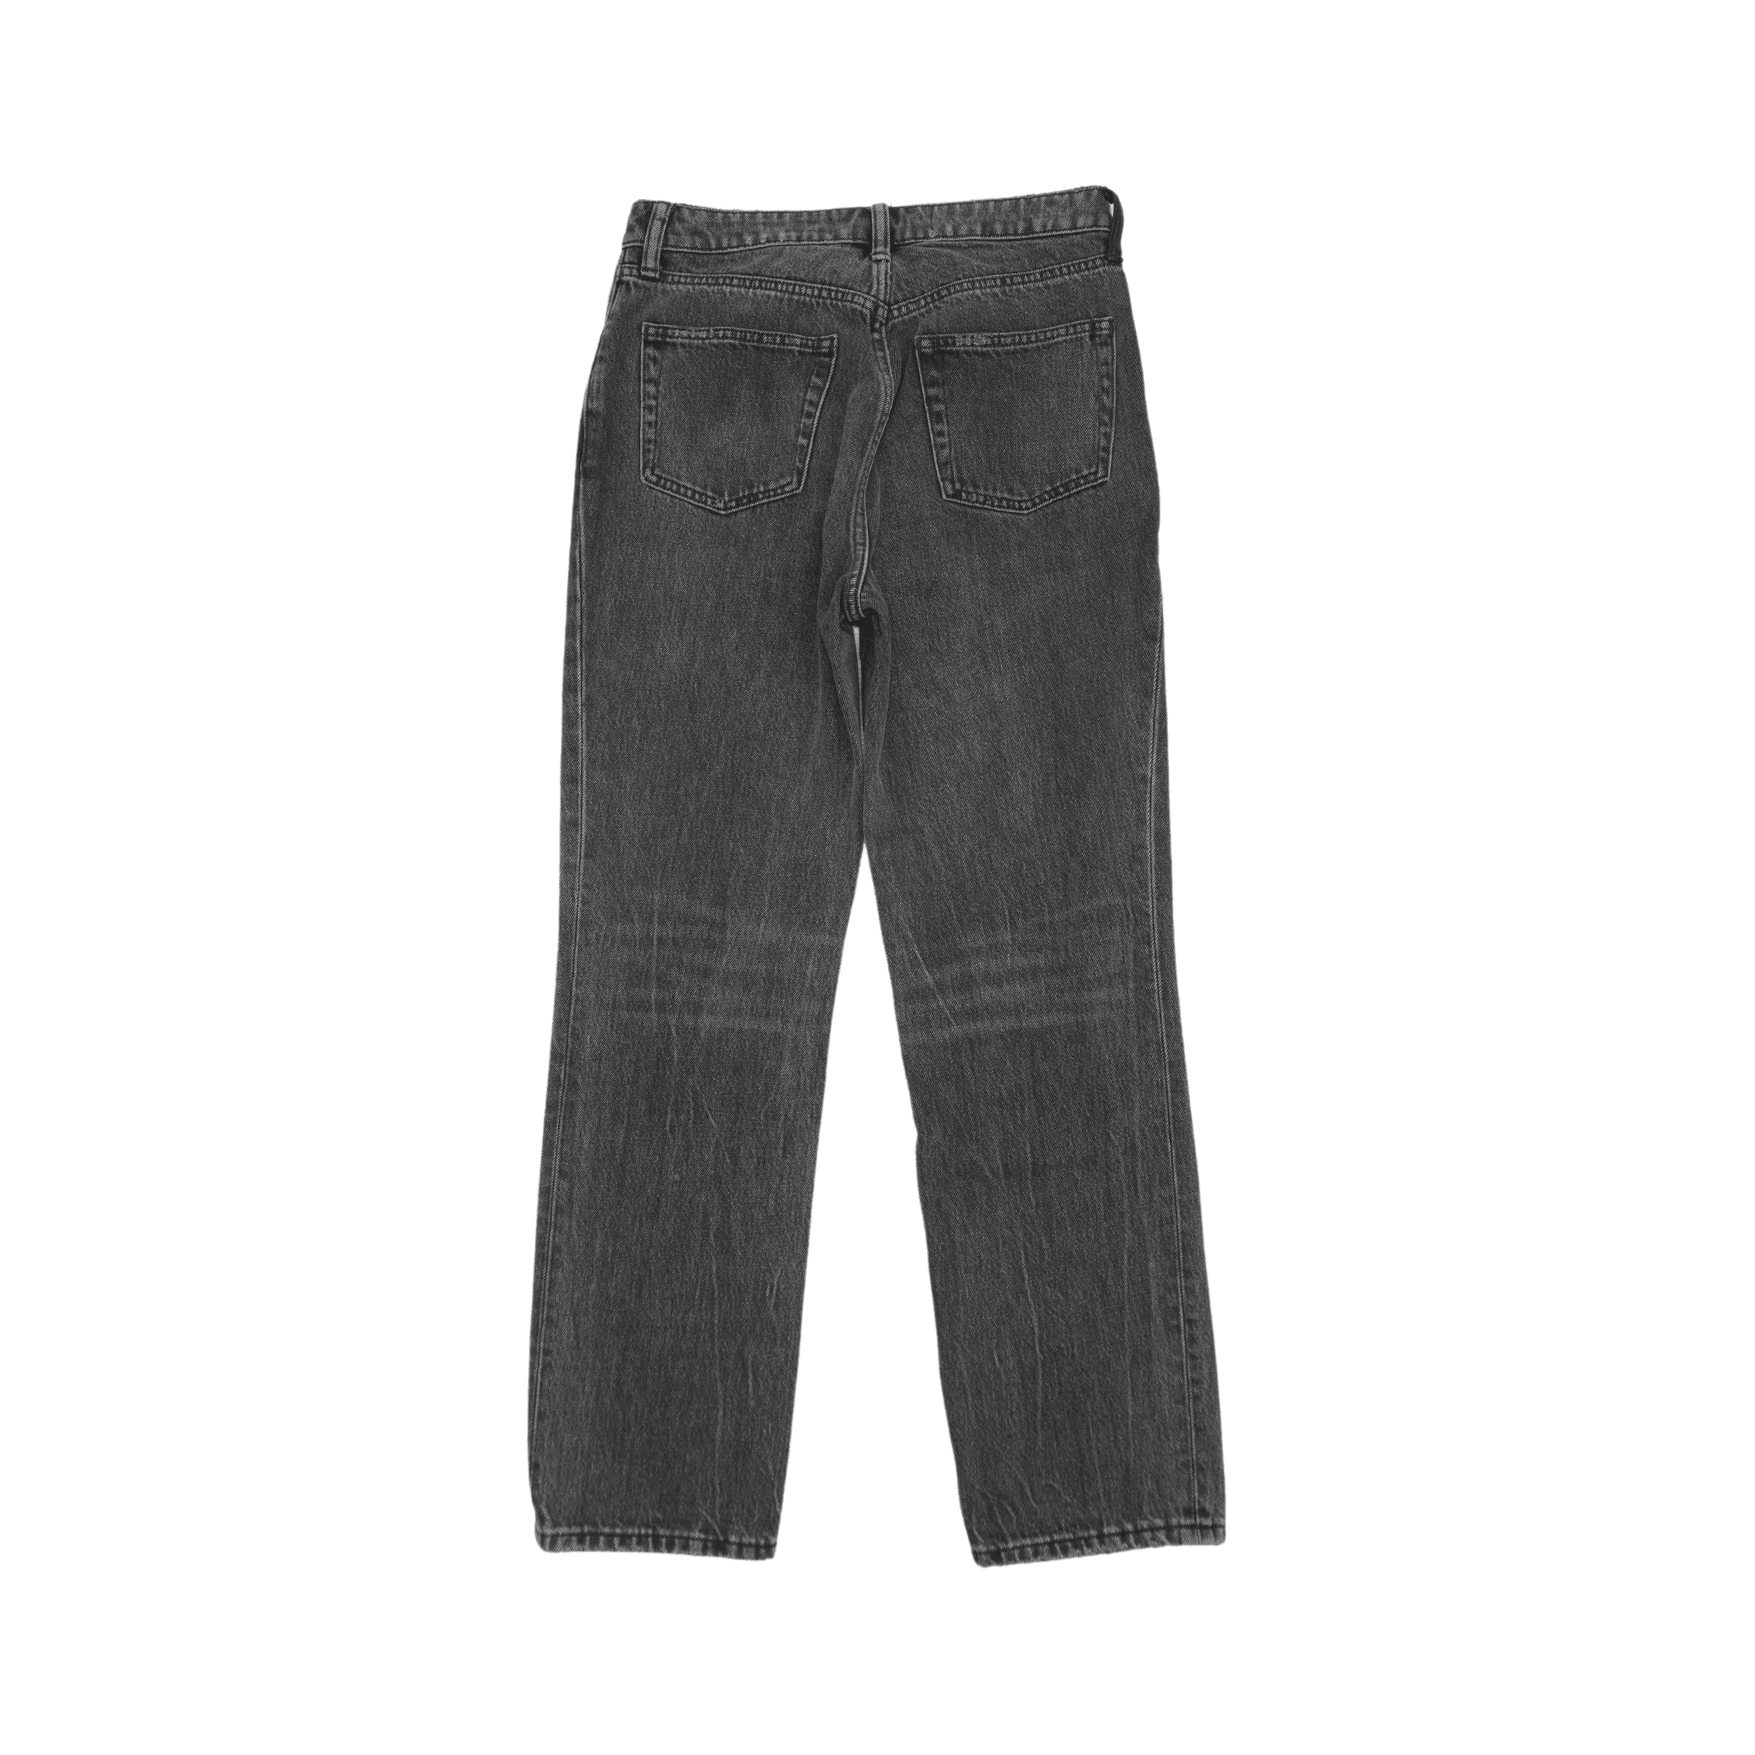 Alexander Wang Jeans - Women's 27 - Fashionably Yours